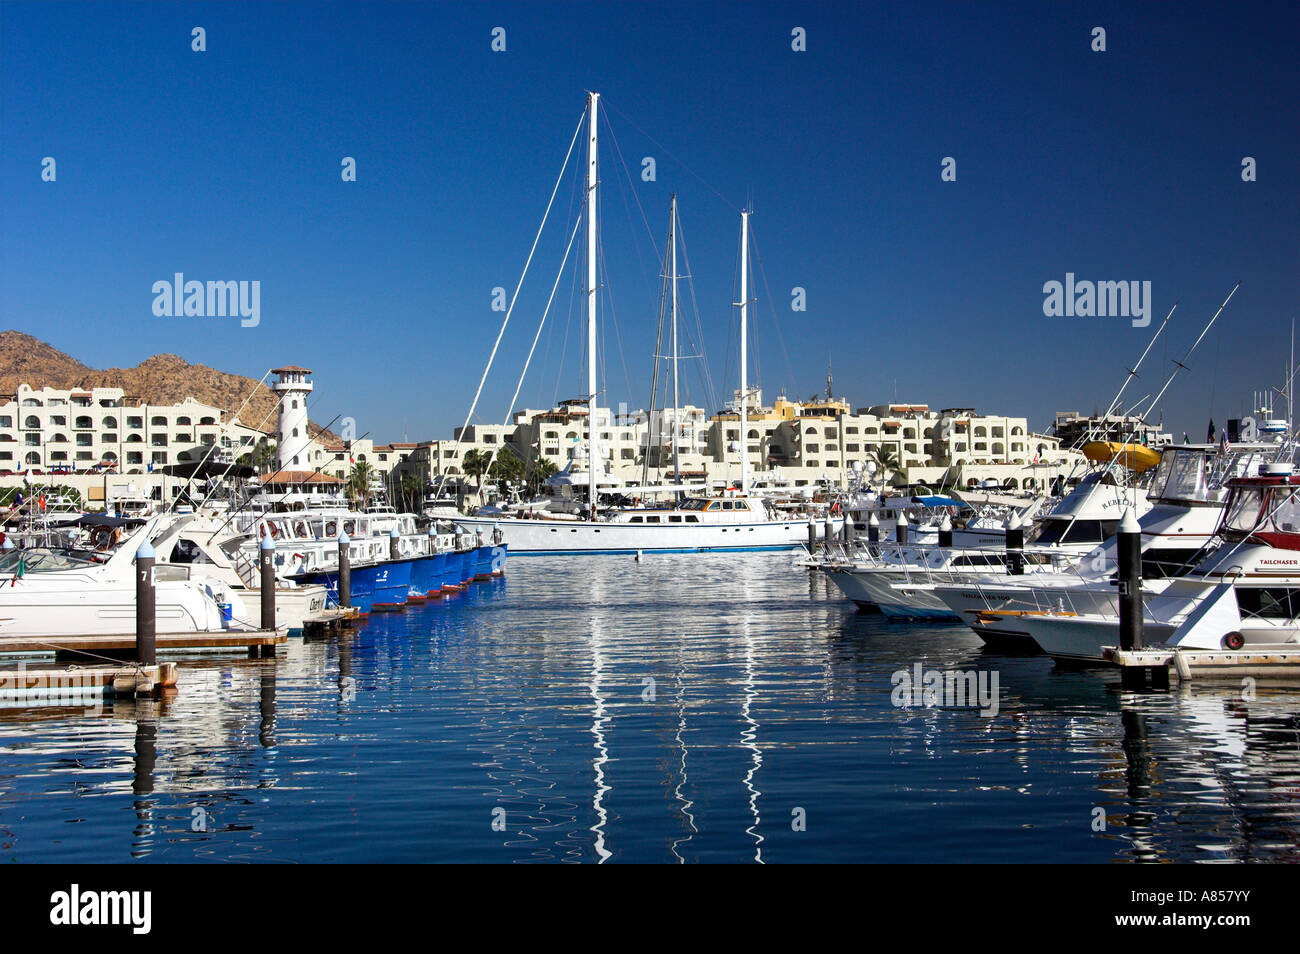 The marina with pleasure boats and a lighthouse at the resort of Cabo San Lucas Mexico Stock Photo